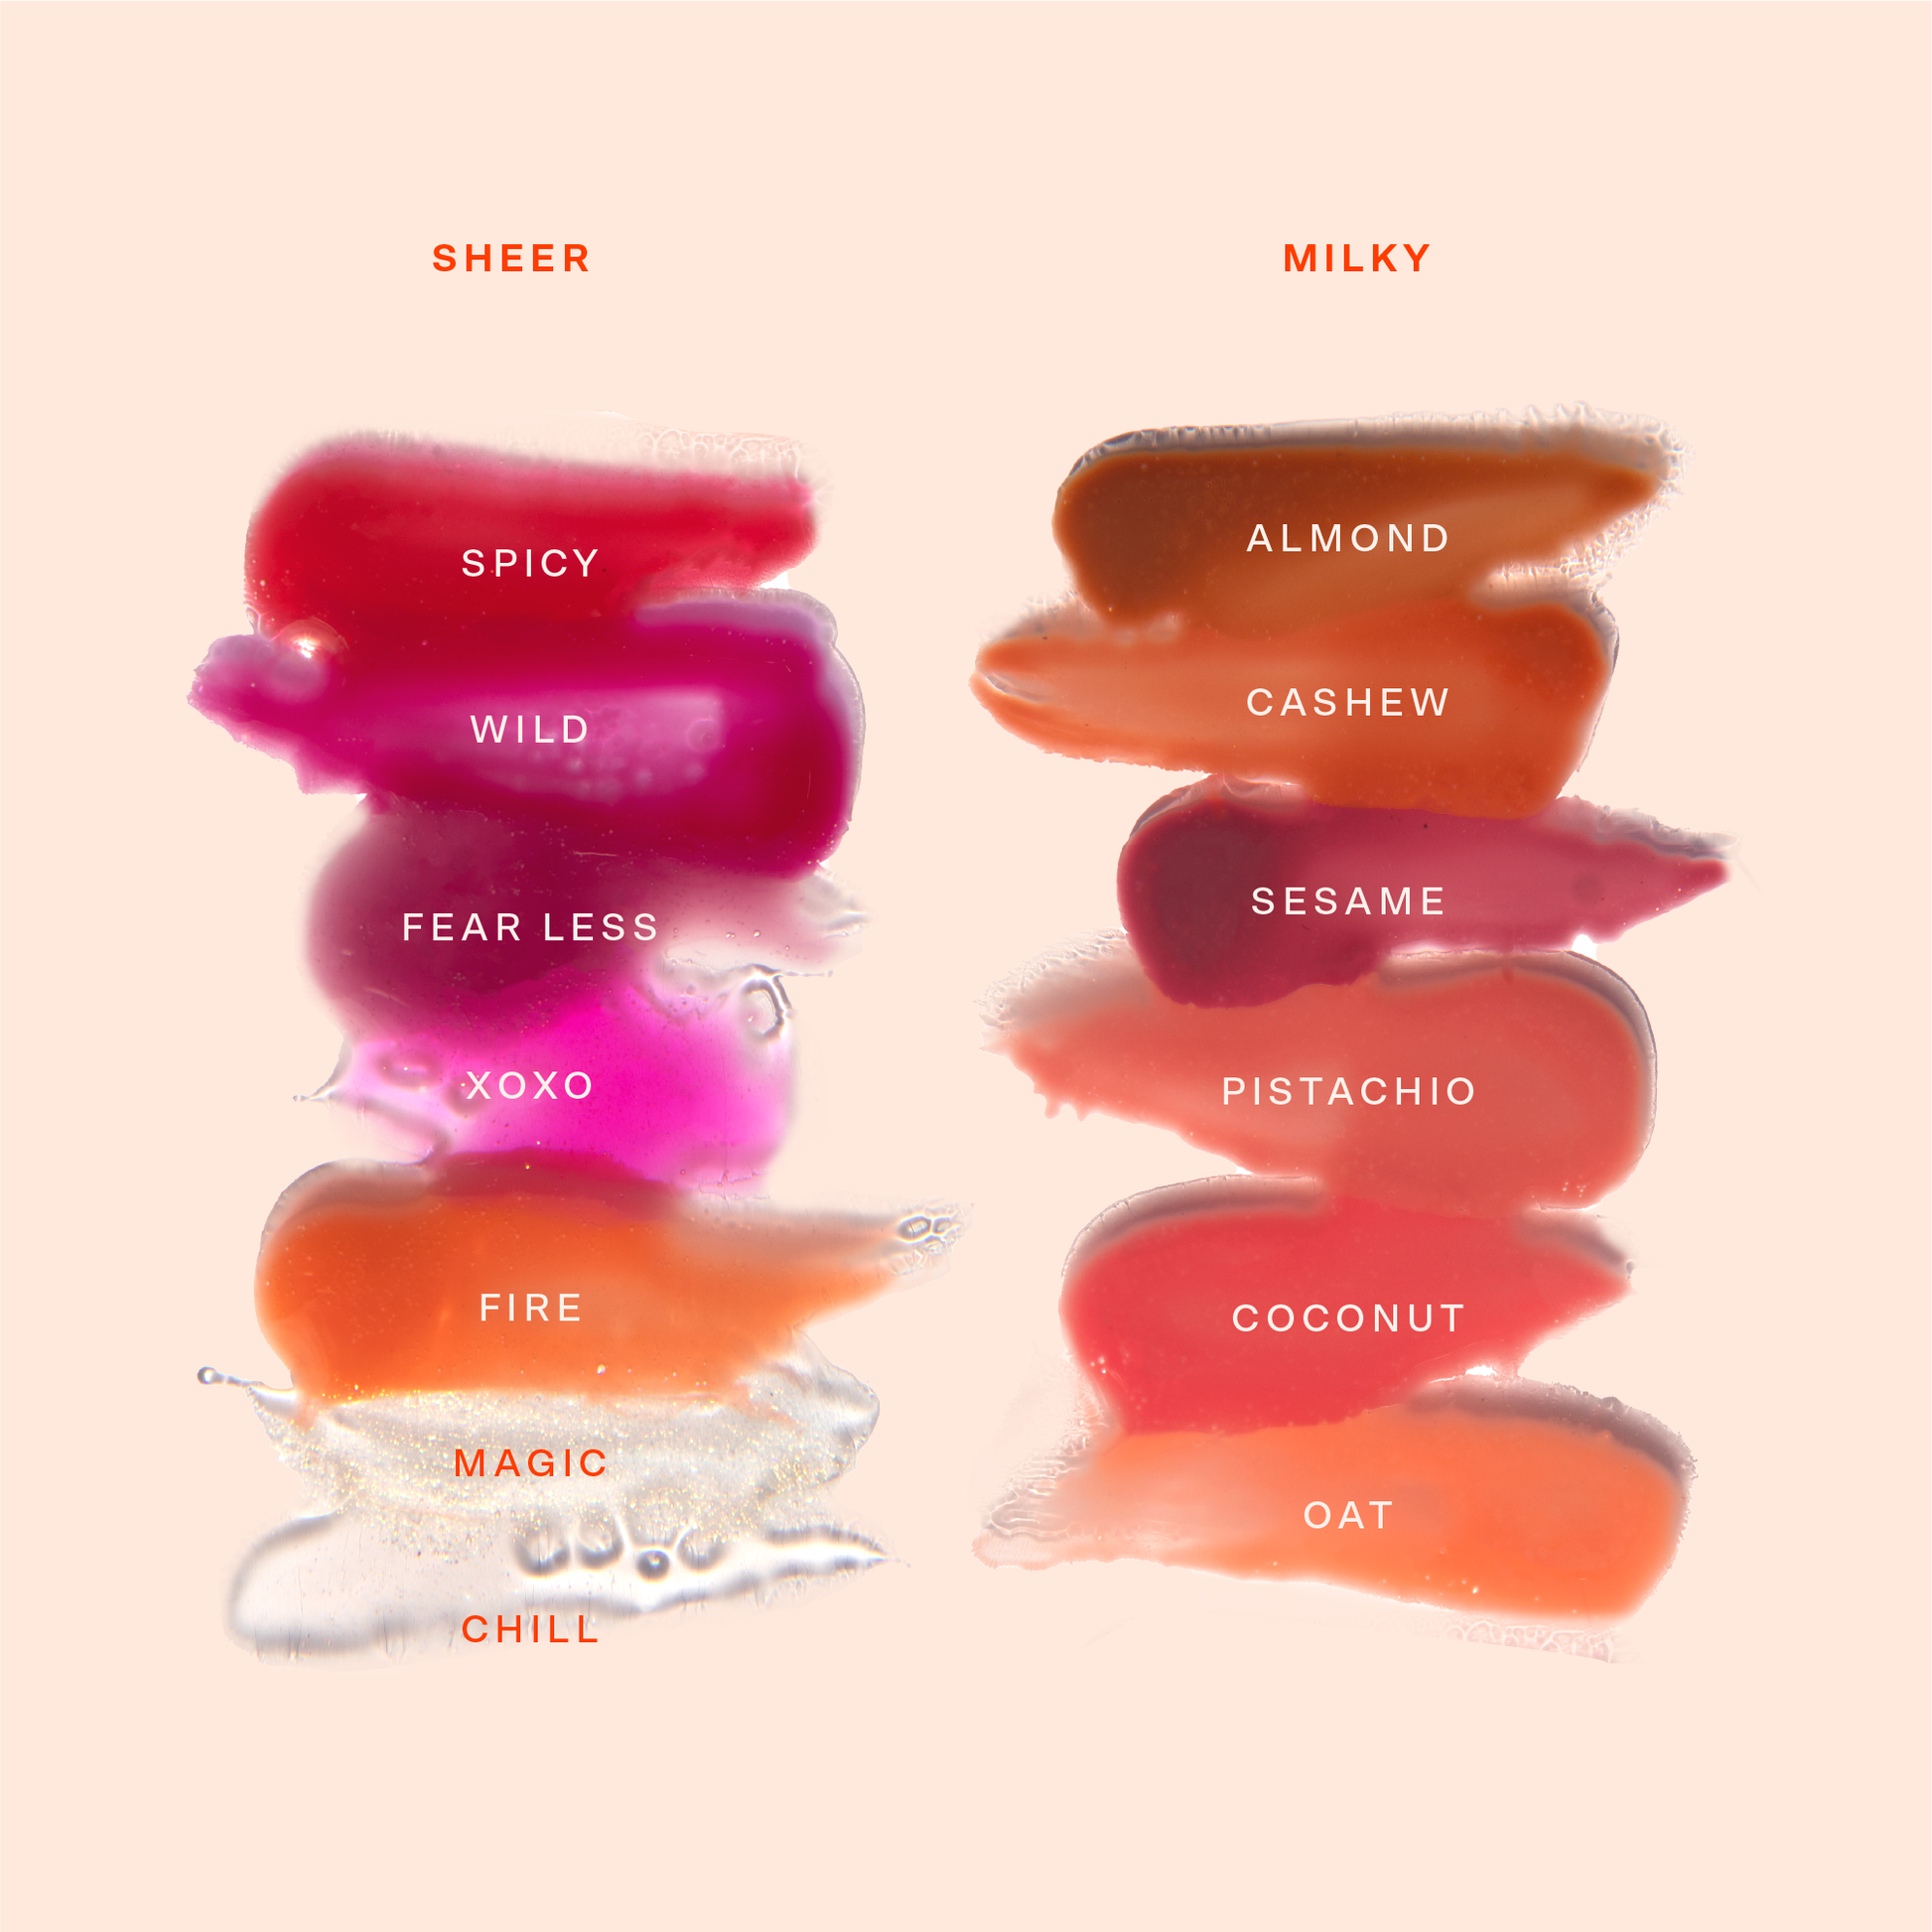 [Shared: All shades of Tower 28 Beauty ShineOn Lip Jelly swatched